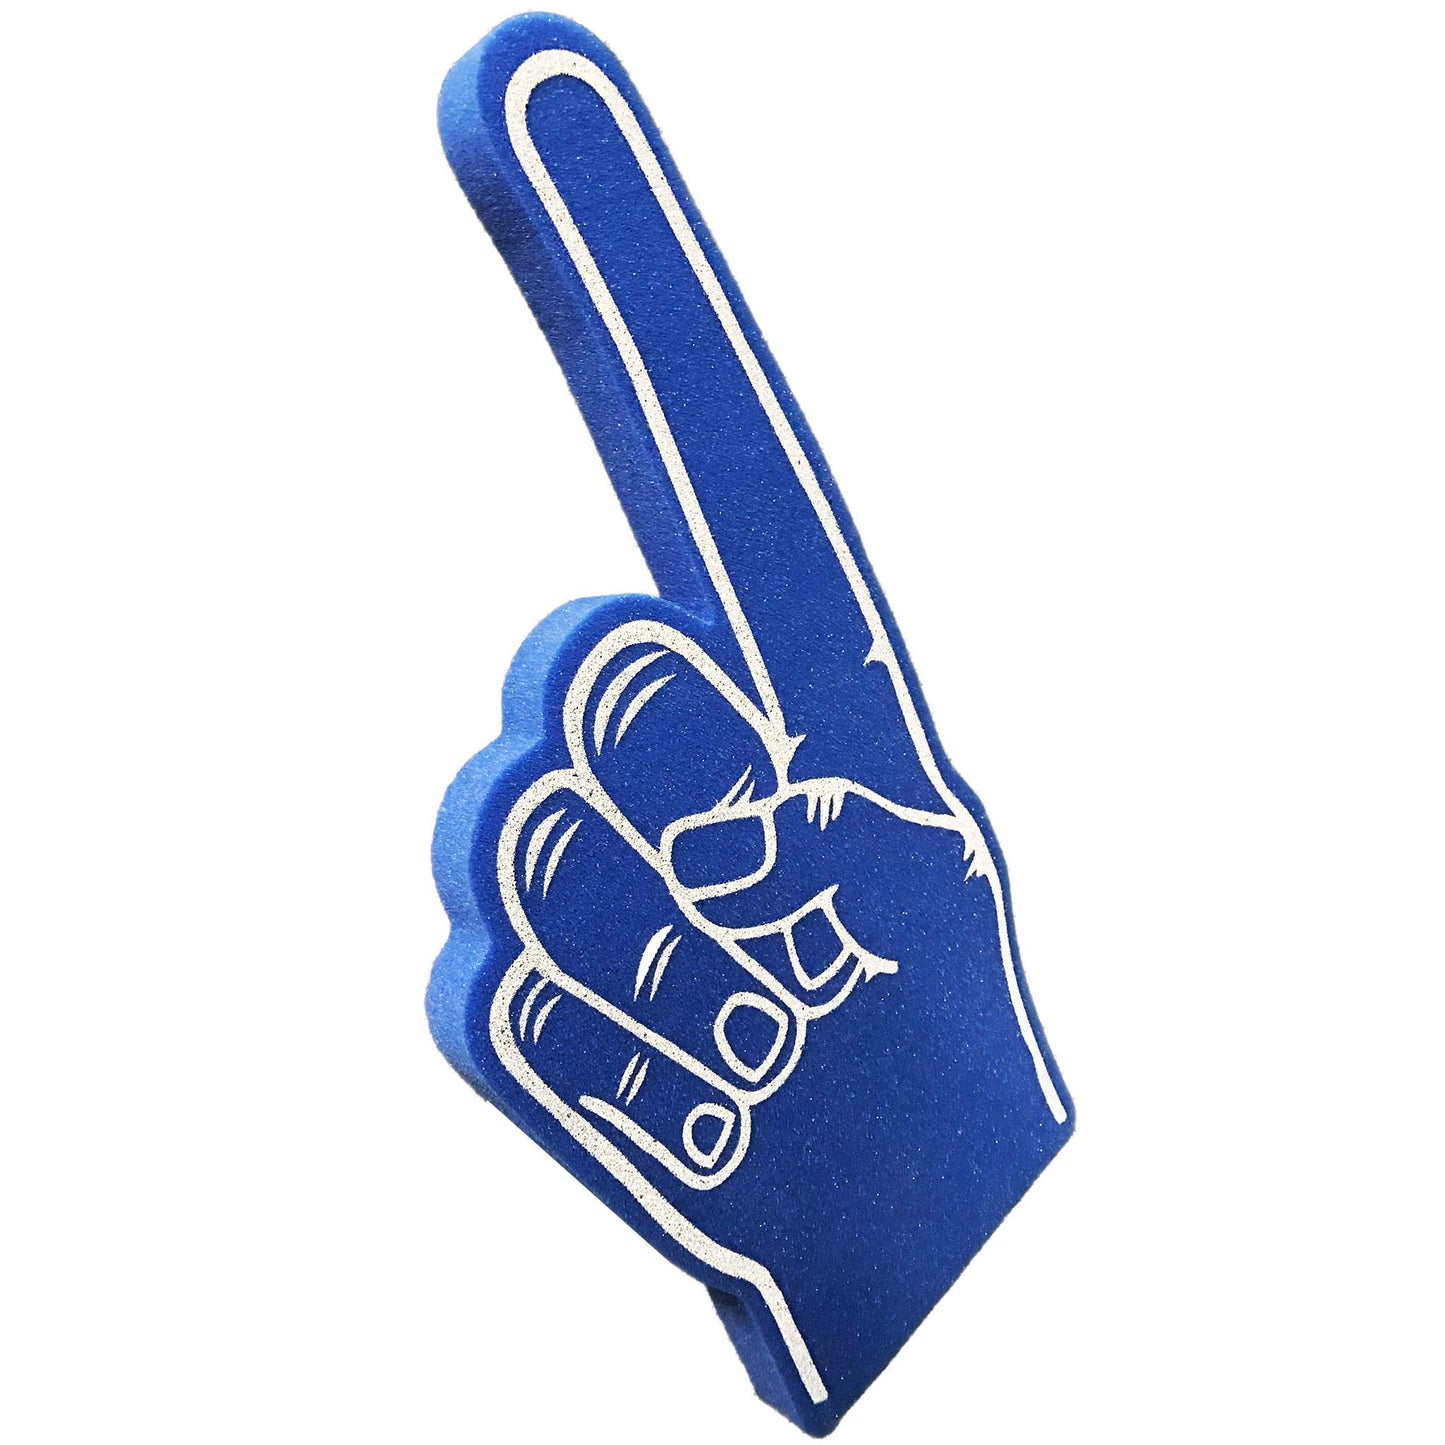 Pointy Palm Printed Foam Finger